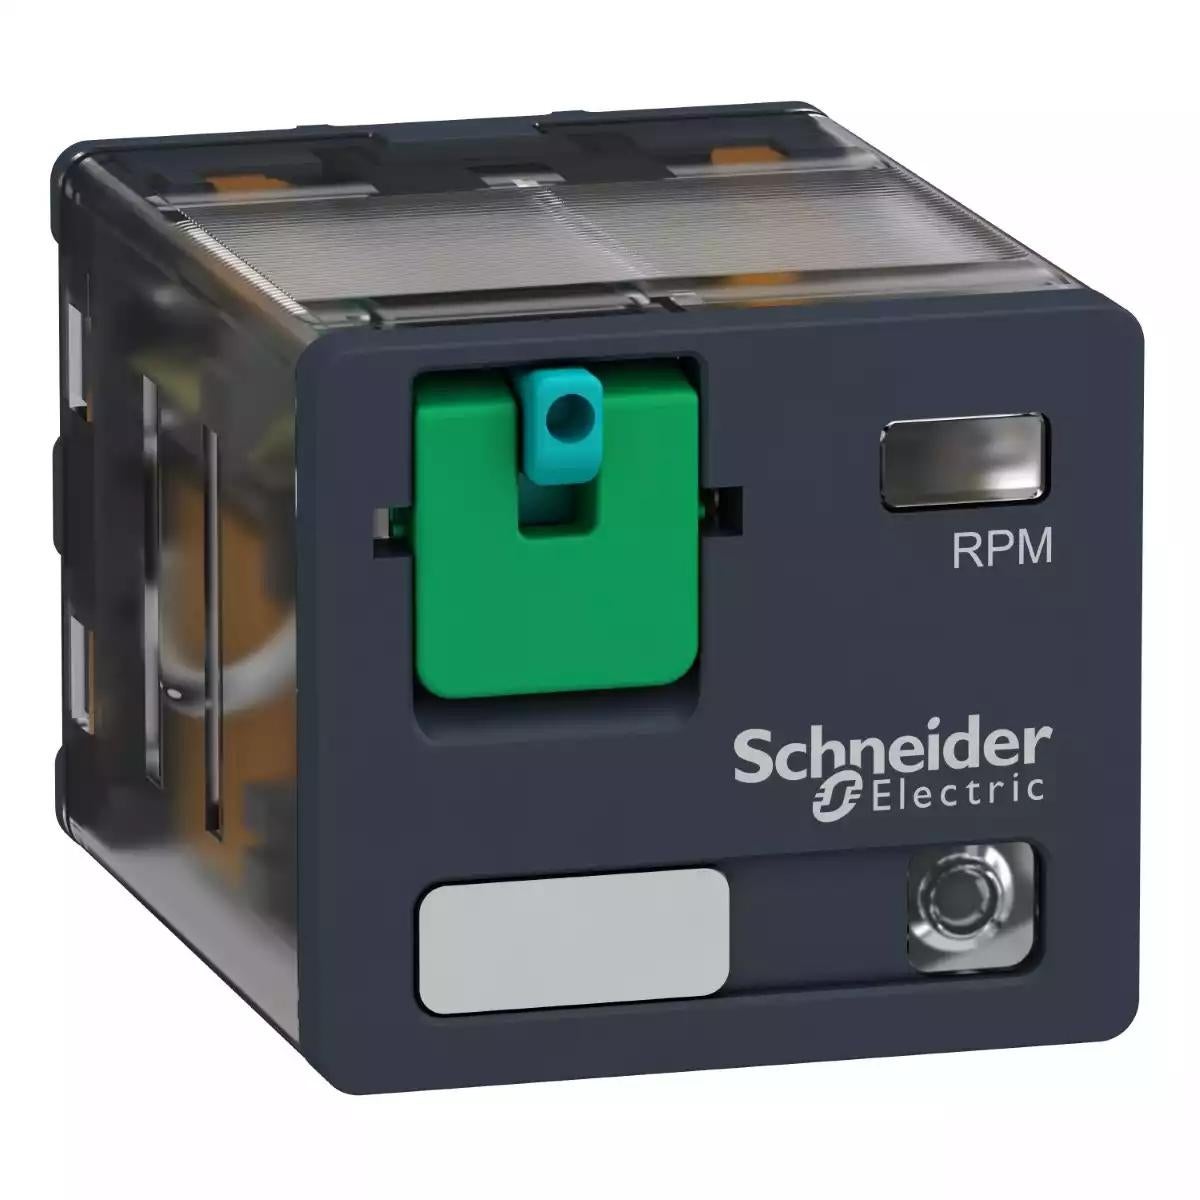 Schneider Electric Zelio RPM - Relay power plug-in relay - 3 C/O - 24 V DC - 15 A - with LED